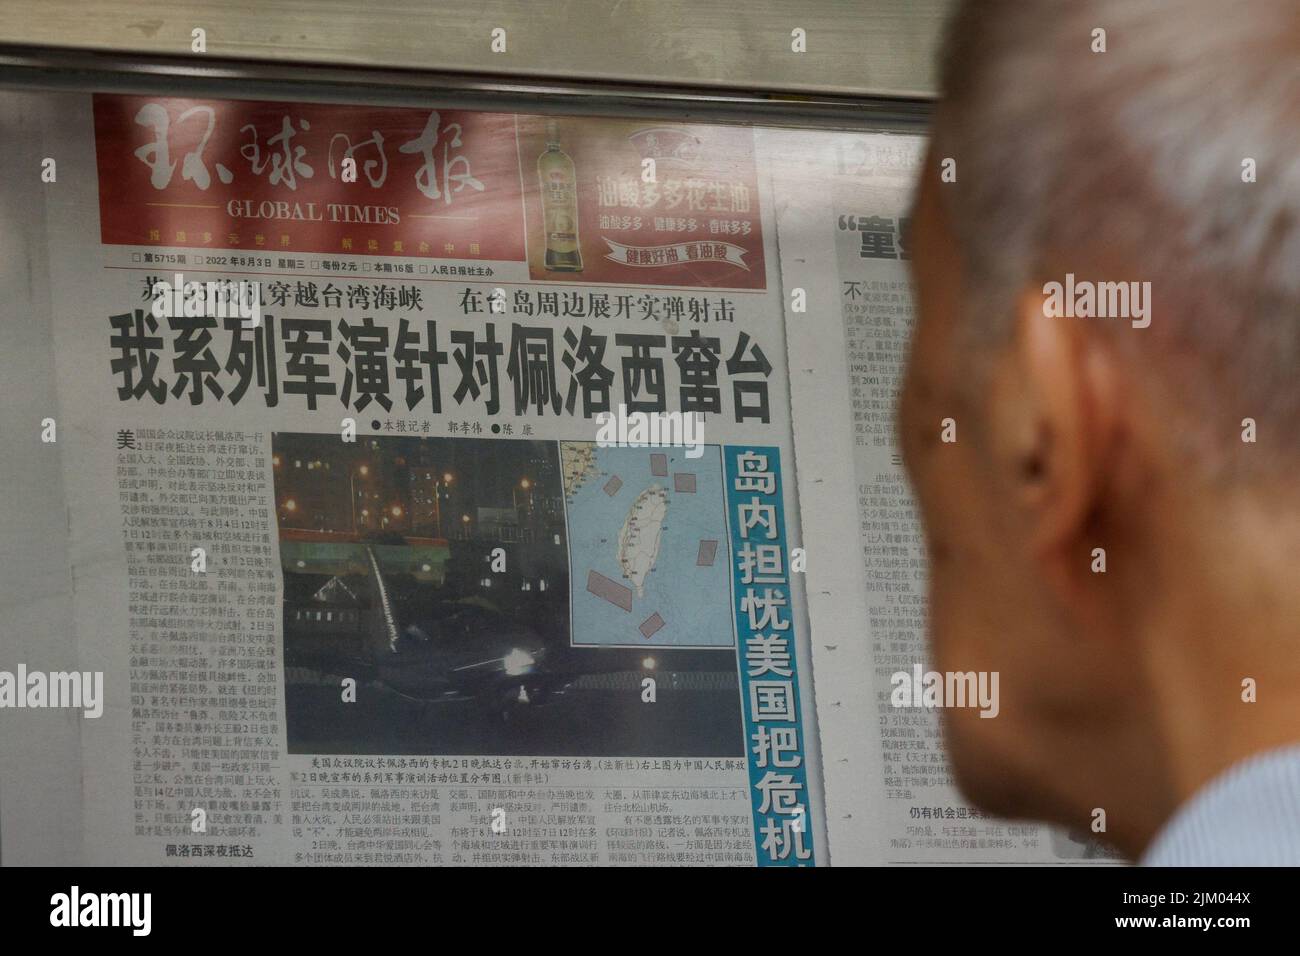 A man reads a Global Times article about military exercises by the Chinese People's Liberation Army (PLA) following U.S. House of Representatives Speaker Nancy Pelosi's Taiwan visit, at a newspaper stand in Beijing, China, August 4, 2022.   REUTERS/Thomas Peter Stock Photo